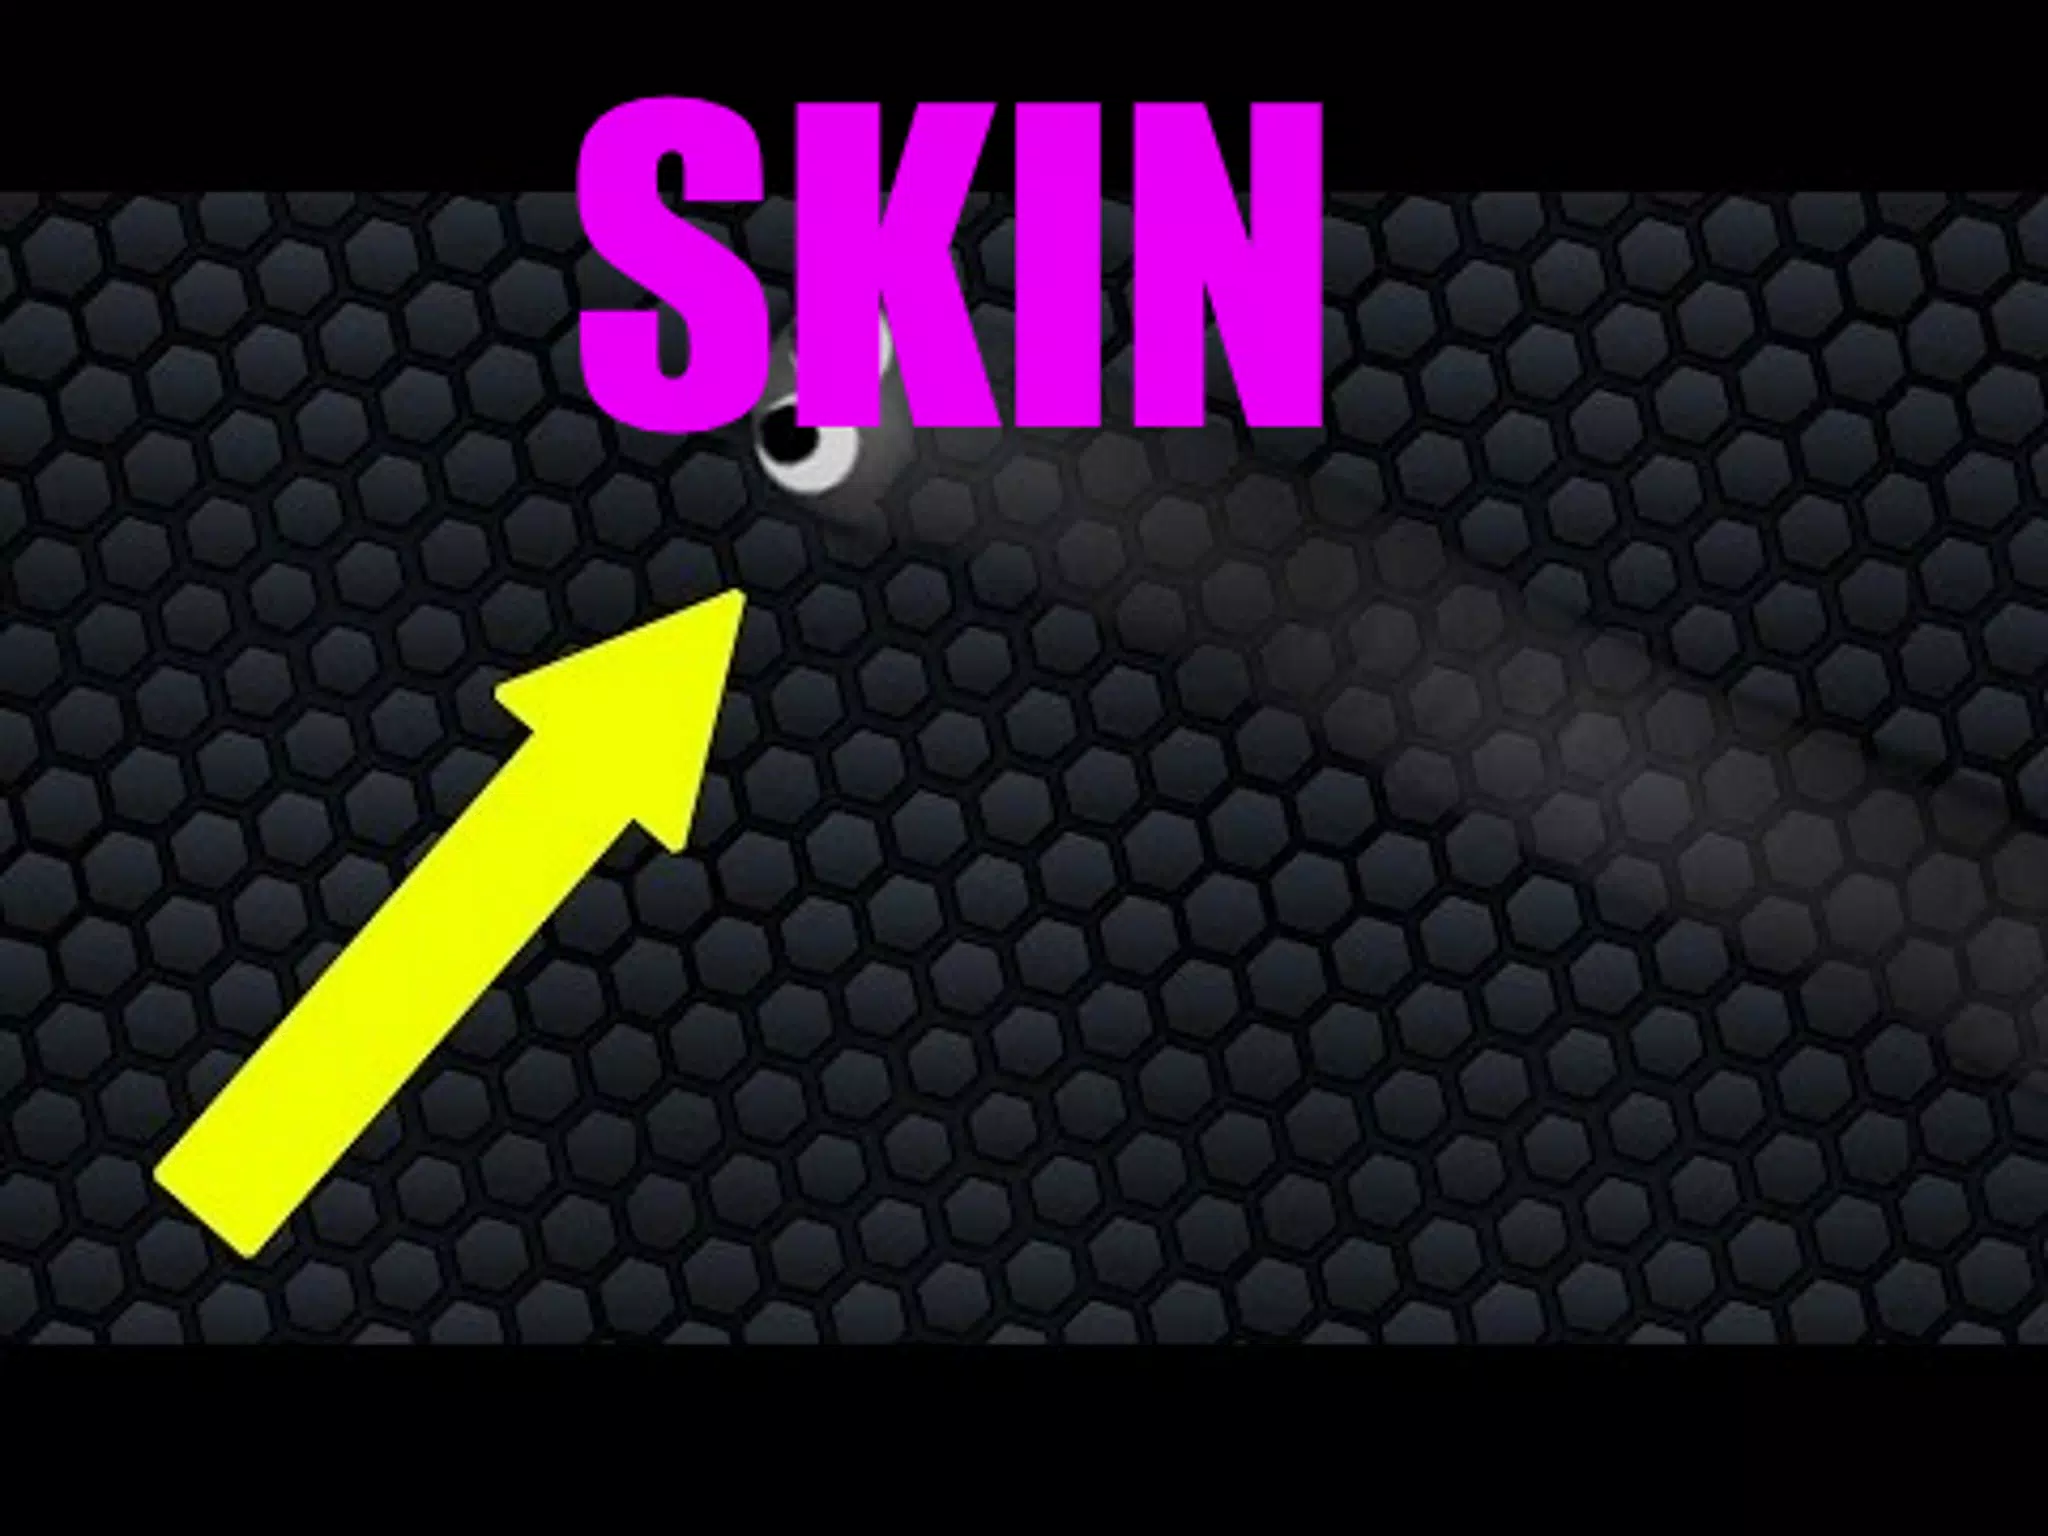 Download do APK de Invisible Skins for Slither.io para Android